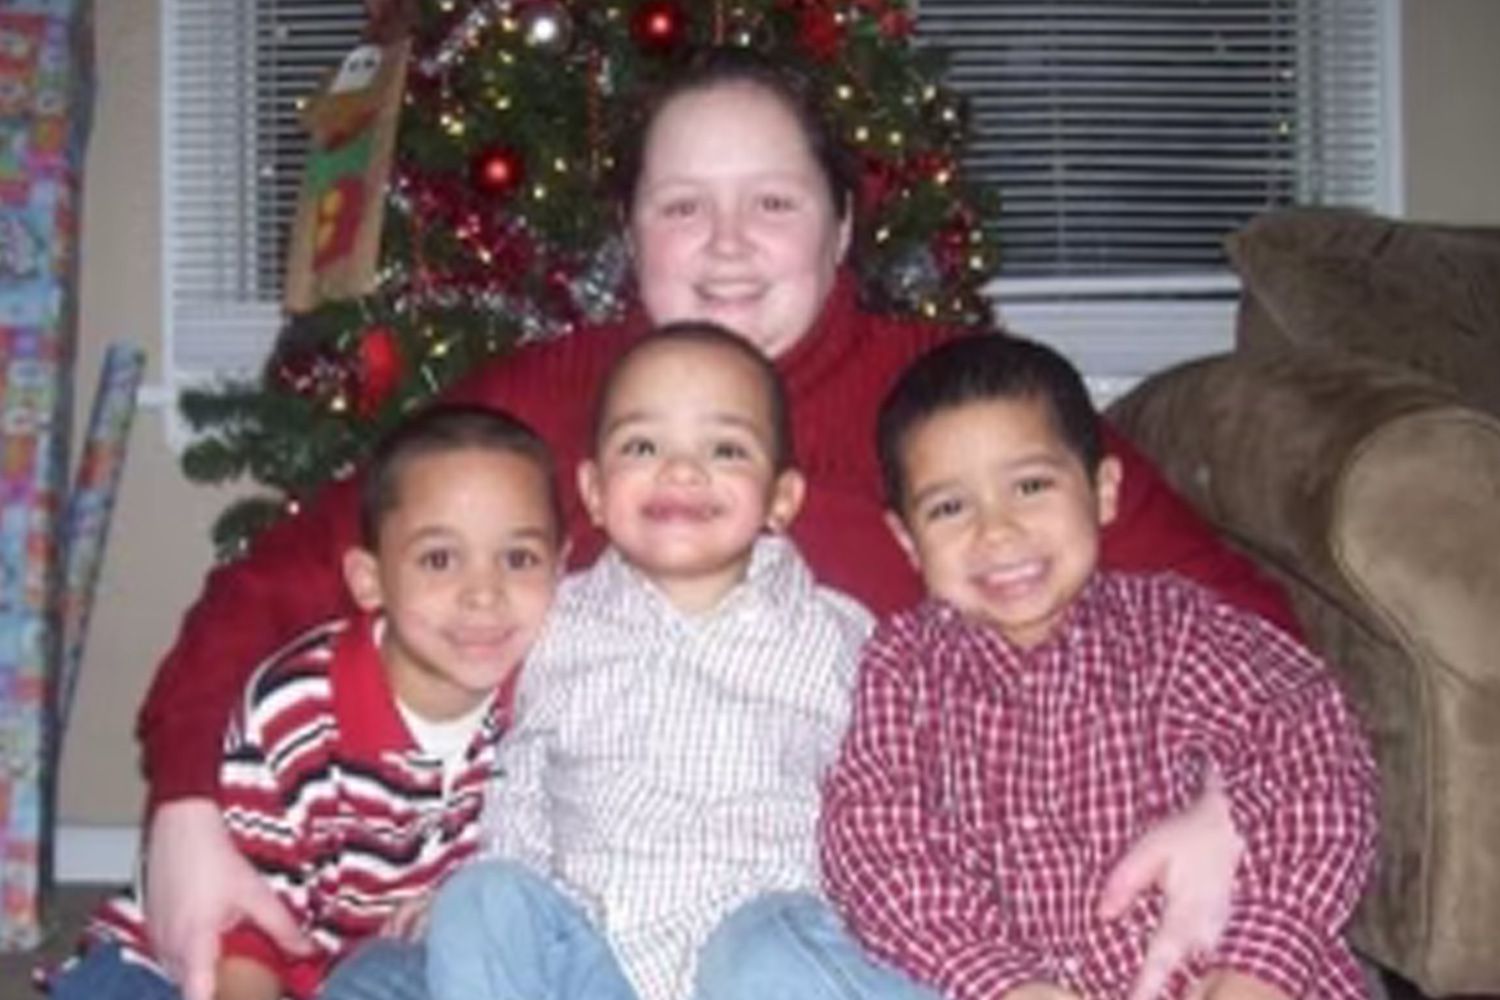 Michigan Mom Spends First Mother’s Day at Home with Her Kids Since Waking Up from a 5-Year Coma